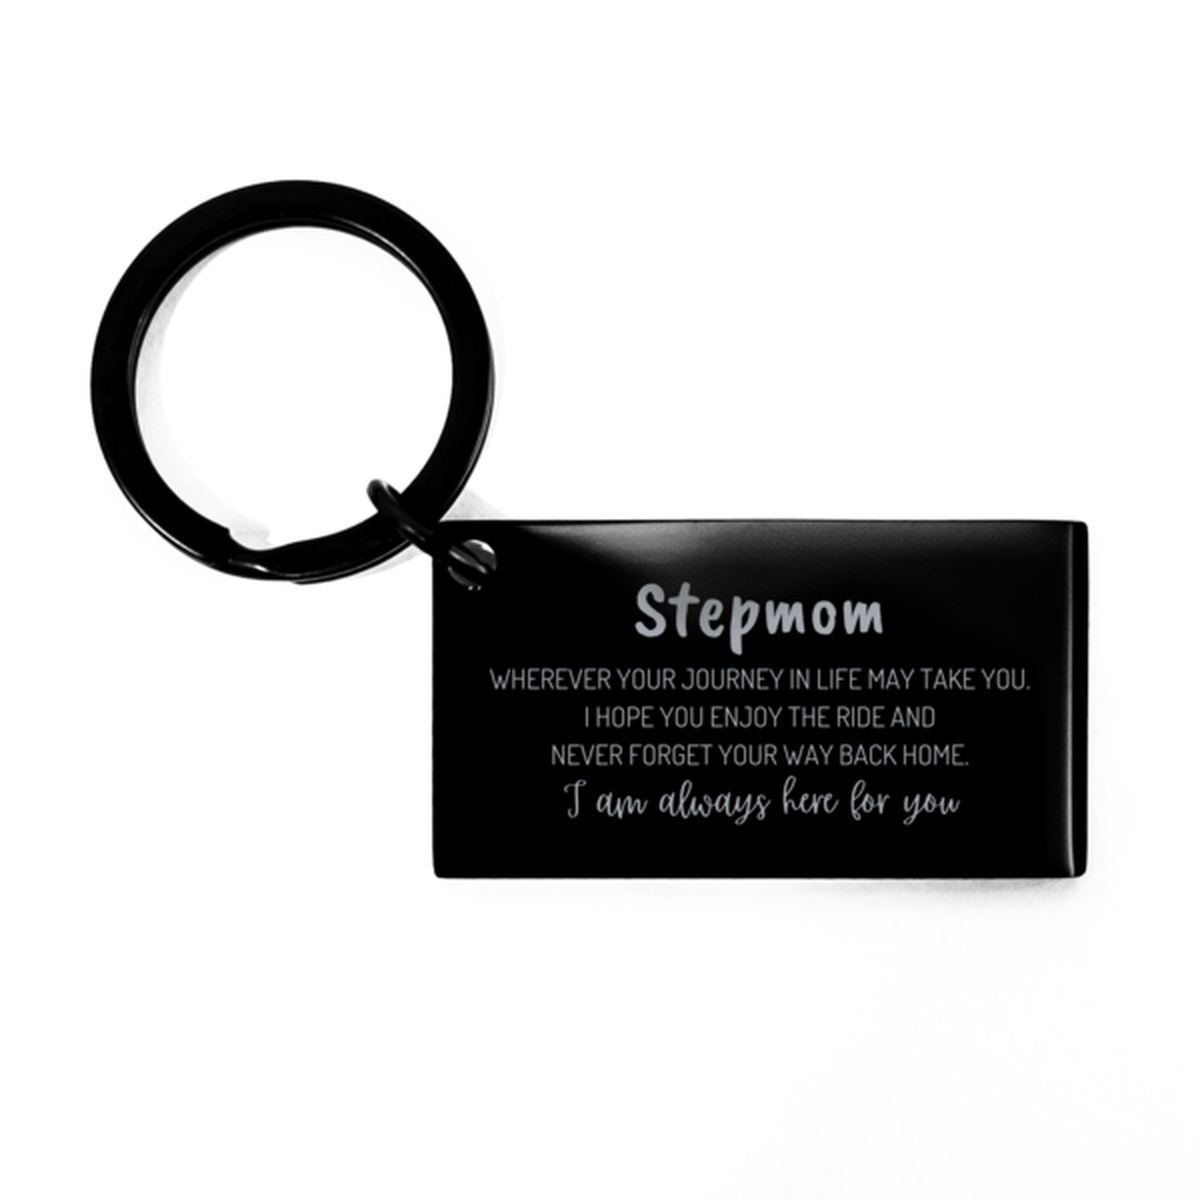 Stepmom wherever your journey in life may take you, I am always here for you Stepmom Keychain, Awesome Christmas Gifts For Stepmom, Stepmom Birthday Gifts for Men Women Family Loved One